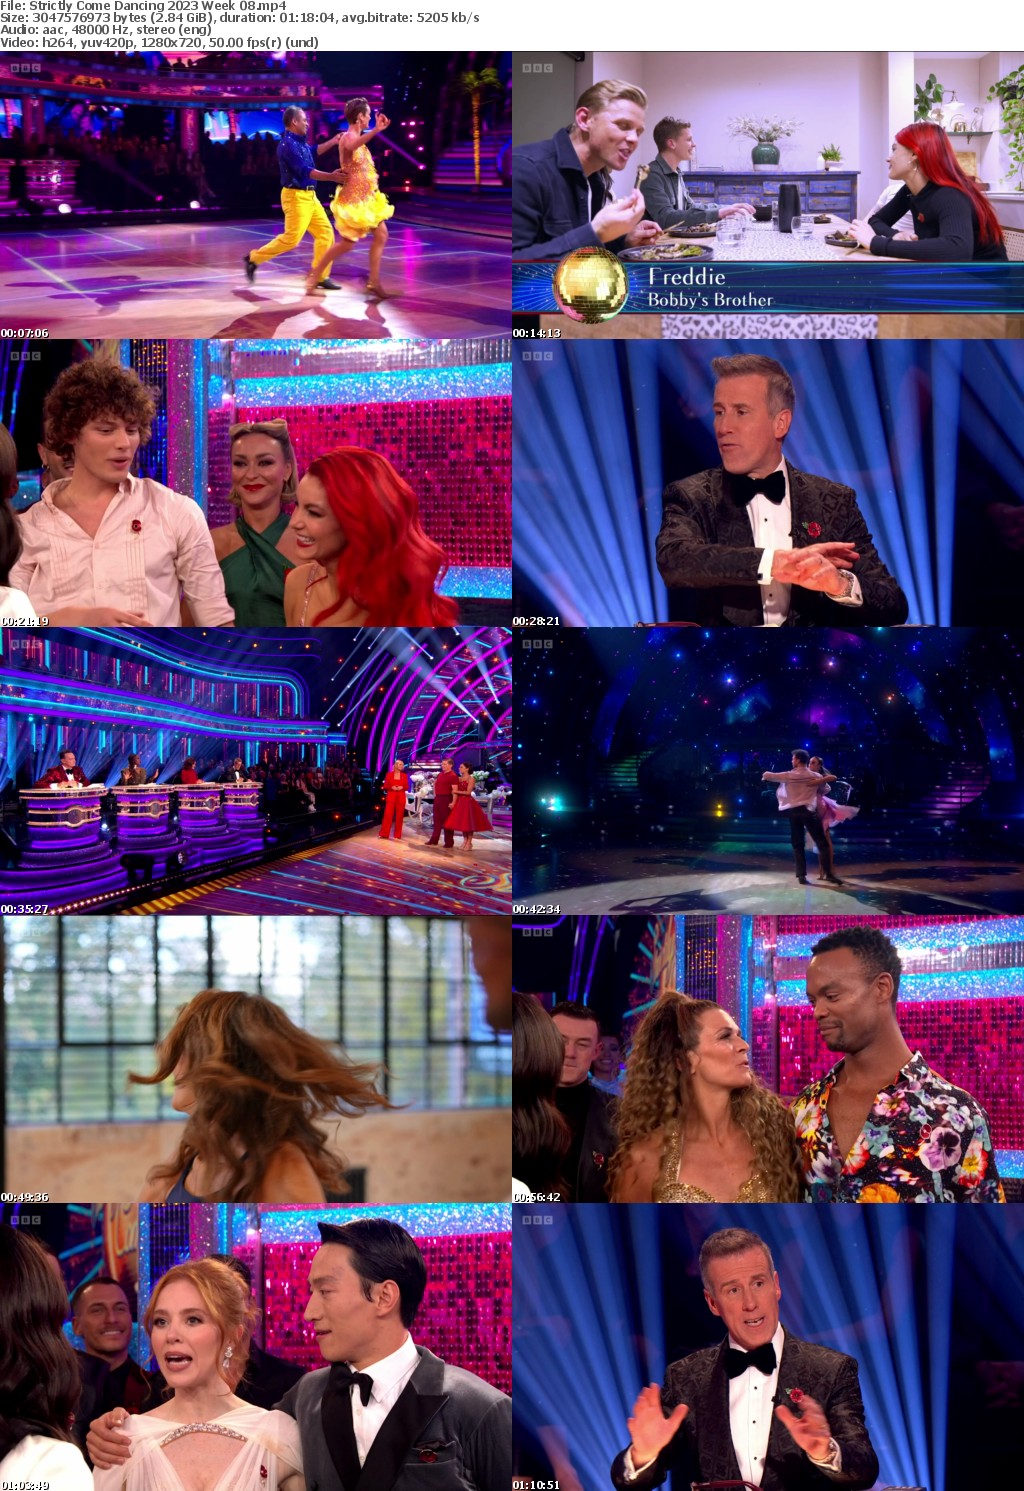 Strictly Come Dancing 2023 Week 08 (1280x720p HD, 50fps, soft Eng subs)